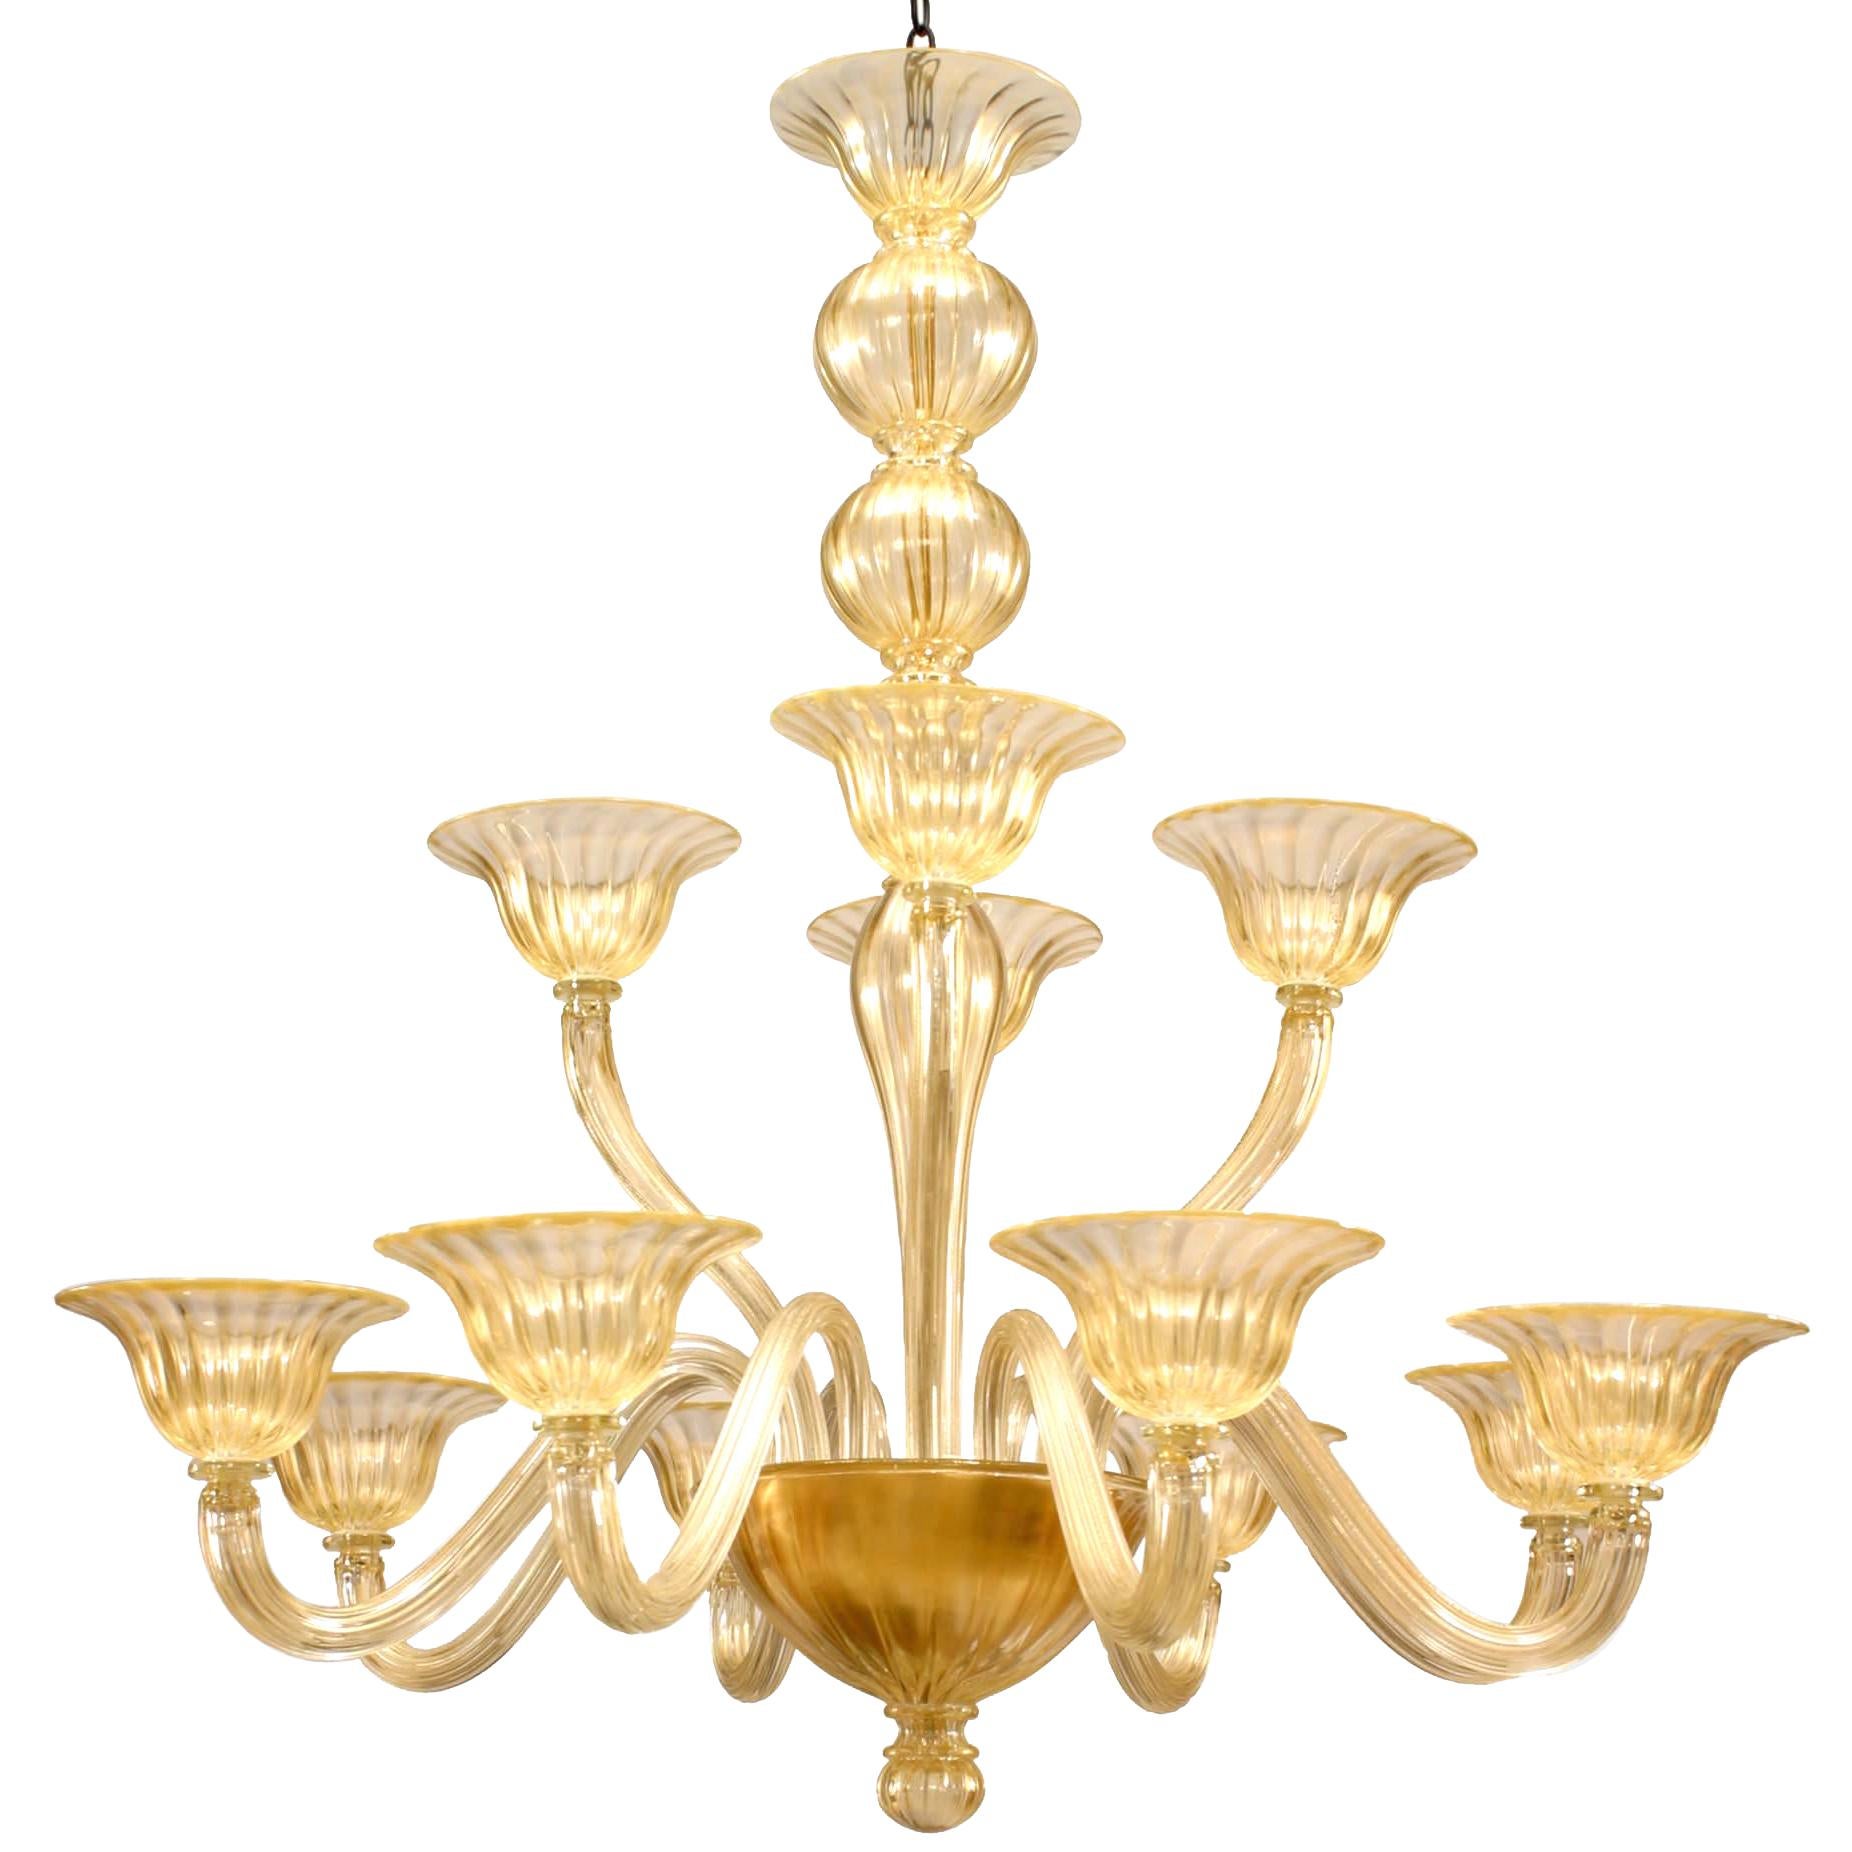 2 Italian Murano Sommerso Gold Dusted Glass Chandeliers For Sale